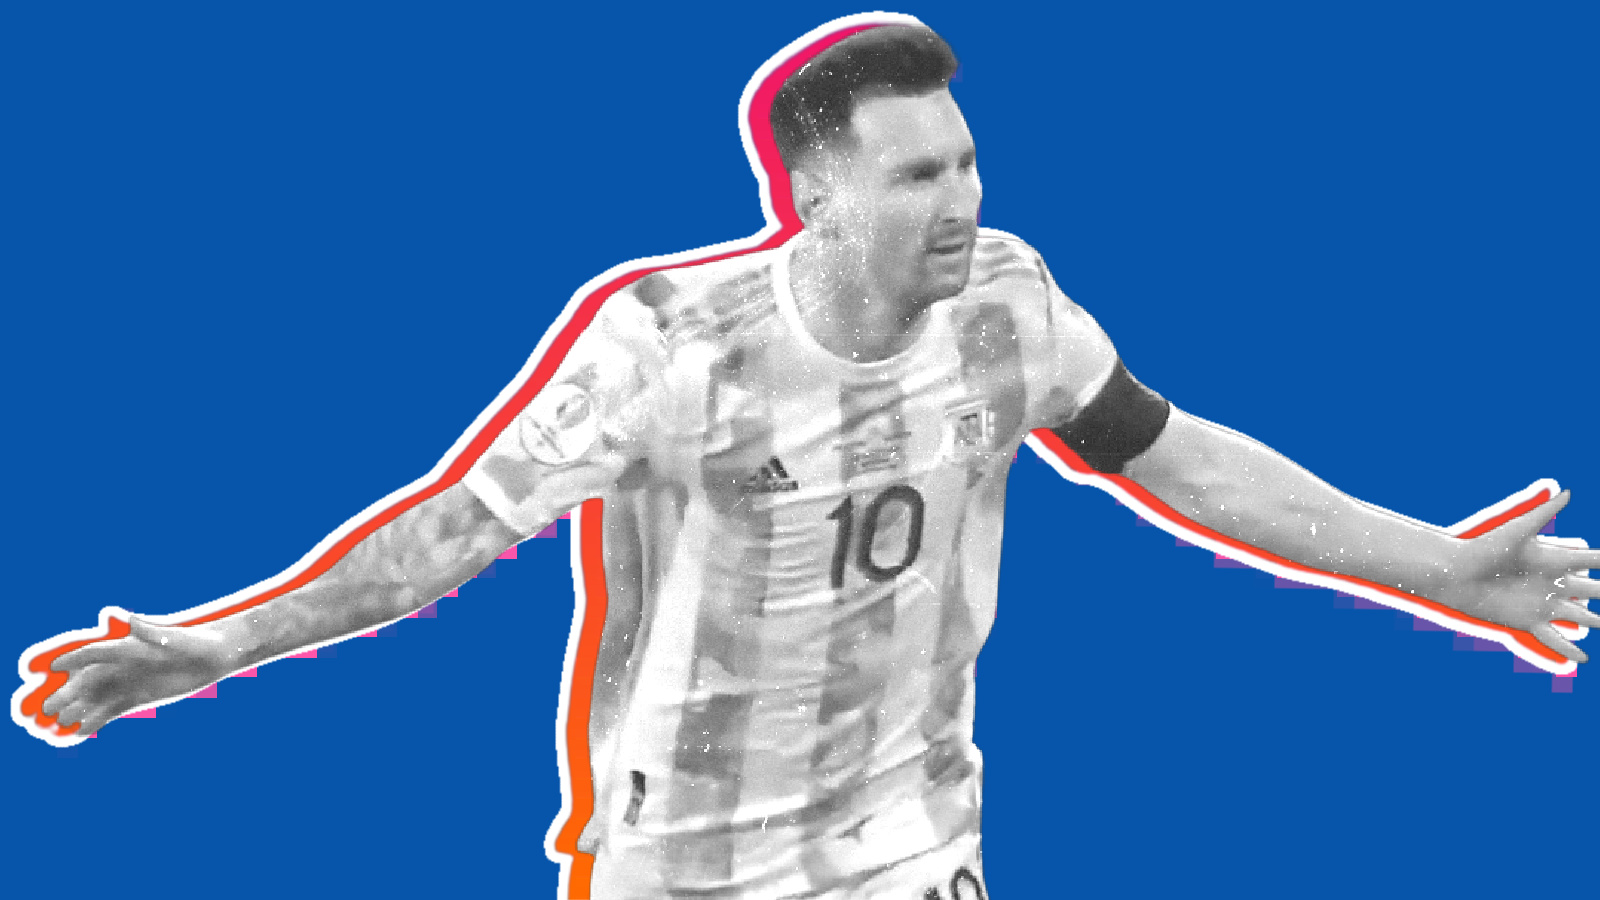 Watch: Lionel Messi foils 8-man wall with textbook free-kick against Ecuador